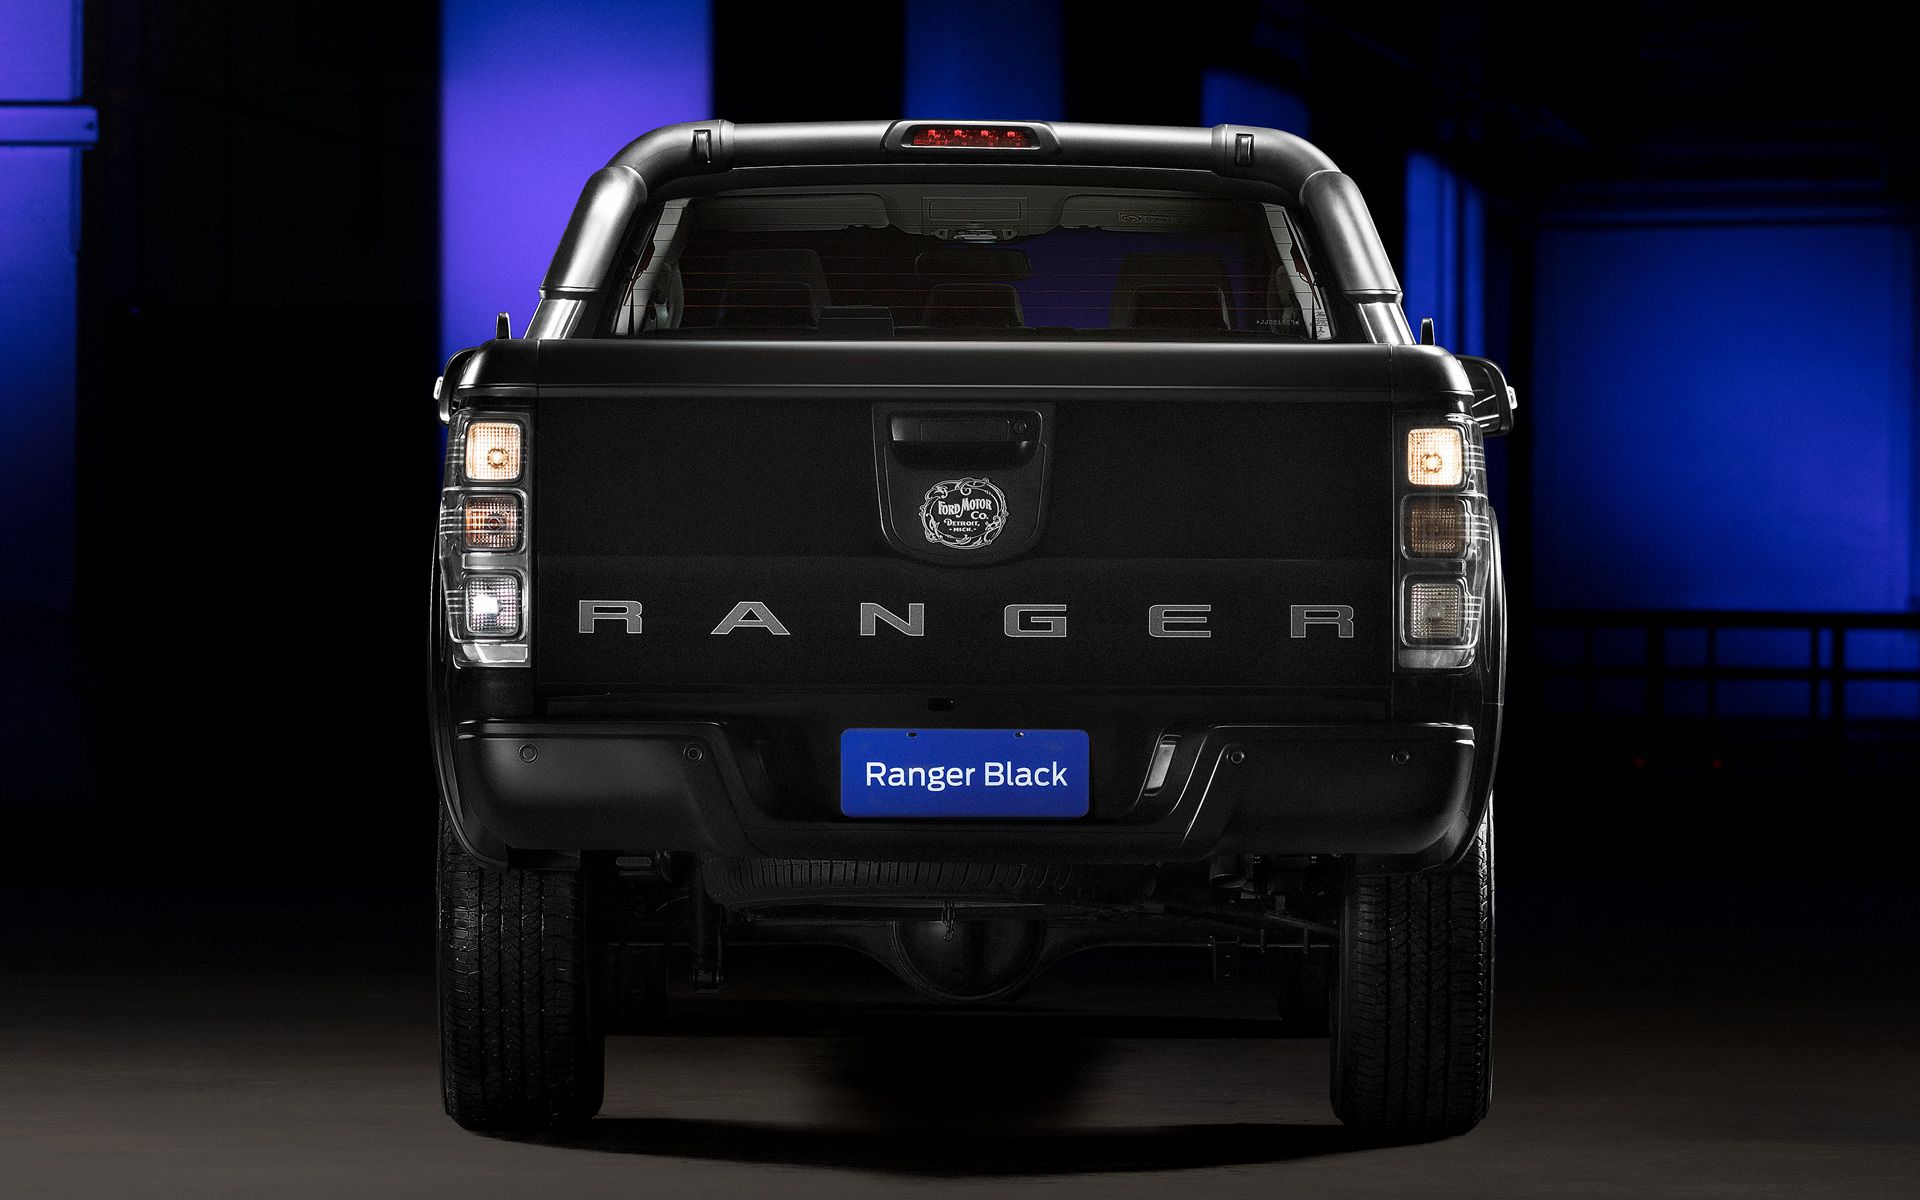 Ford Ranger Black Concept and HD Image